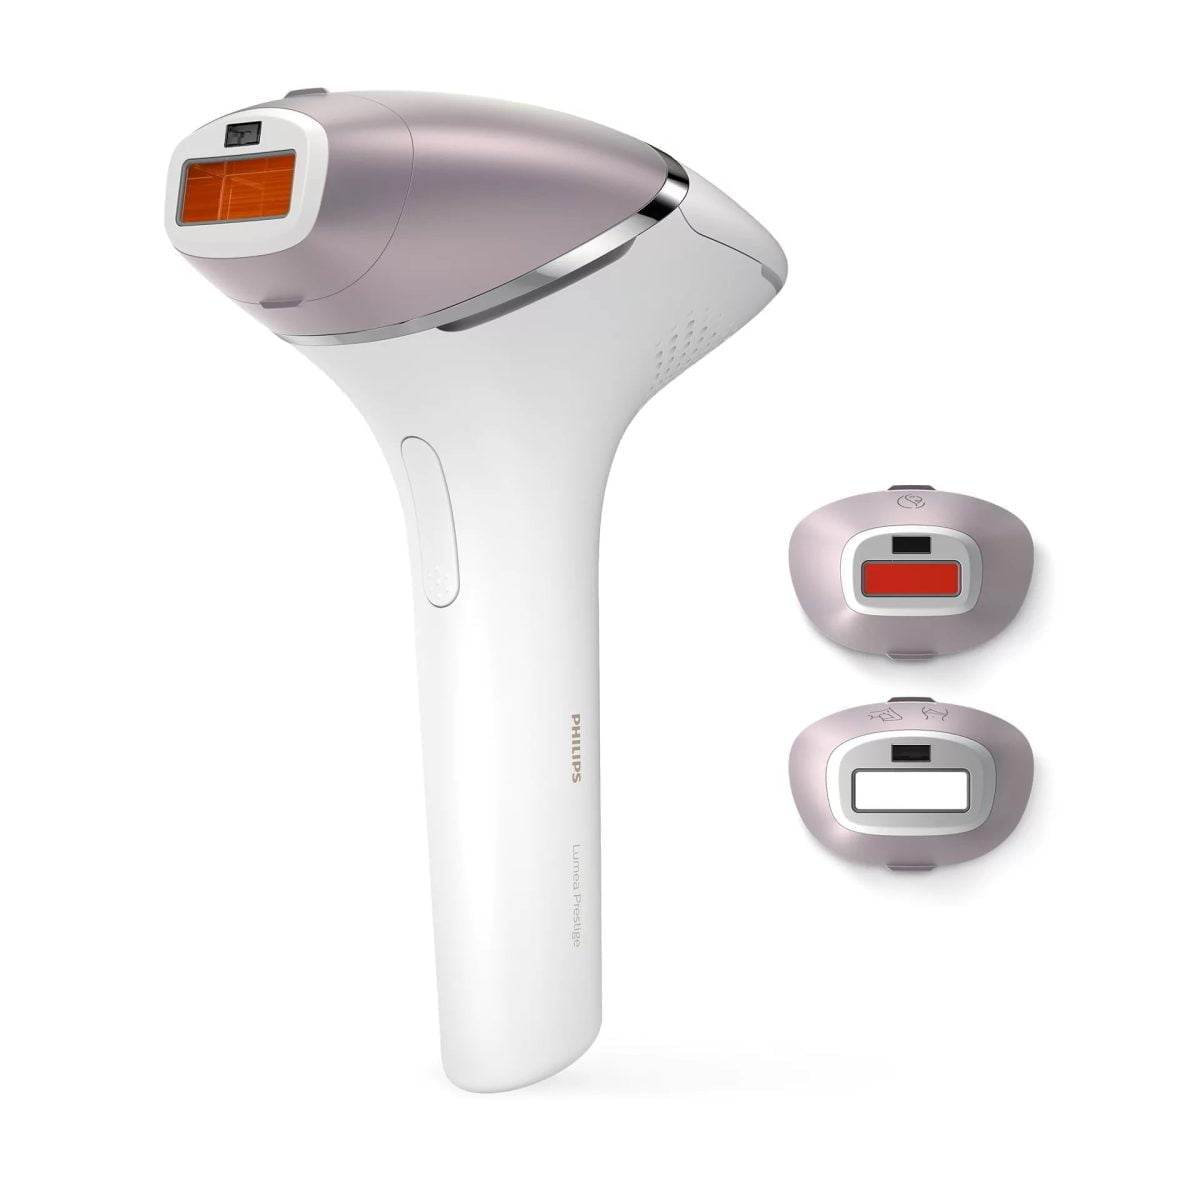 2F775C07Ca1743E3Aa32Ab5A011Cf4C2 Philips Philips Lumea Prestige, The Most Powerful Ipl Yet, Designed For Your Body'S Curves And Easiest At-Home Experience. Uniquely Curved, Intelligent Attachments Perfectly Fit Your Curves And Adapt The Treatment Programs For Each Body Area. &Amp;Lt;H1&Amp;Gt;About The Product&Amp;Lt;/H1&Amp;Gt; &Amp;Lt;Ul&Amp;Gt; &Amp;Lt;Li&Amp;Gt;&Amp;Lt;Span Class=&Amp;Quot;A-List-Item&Amp;Quot;&Amp;Gt;Most Effective Ipl With Senseiq Technology&Amp;Lt;/Span&Amp;Gt;&Amp;Lt;/Li&Amp;Gt; &Amp;Lt;Li&Amp;Gt;&Amp;Lt;Span Class=&Amp;Quot;A-List-Item&Amp;Quot;&Amp;Gt;Enjoy Up To 8 Weeks Of Smooth, Hair-Free Skin&Amp;Lt;/Span&Amp;Gt;&Amp;Lt;/Li&Amp;Gt; &Amp;Lt;Li&Amp;Gt;&Amp;Lt;Span Class=&Amp;Quot;A-List-Item&Amp;Quot;&Amp;Gt;With Smartskin Sensor&Amp;Lt;/Span&Amp;Gt;&Amp;Lt;/Li&Amp;Gt; &Amp;Lt;Li&Amp;Gt;&Amp;Lt;Span Class=&Amp;Quot;A-List-Item&Amp;Quot;&Amp;Gt;Use Either Cordless Or Corded&Amp;Lt;/Span&Amp;Gt;&Amp;Lt;/Li&Amp;Gt; &Amp;Lt;Li&Amp;Gt;&Amp;Lt;Span Class=&Amp;Quot;A-List-Item&Amp;Quot;&Amp;Gt;Designed For Convenient Treatment At Home&Amp;Lt;/Span&Amp;Gt;&Amp;Lt;/Li&Amp;Gt; &Amp;Lt;Li&Amp;Gt;&Amp;Lt;Span Class=&Amp;Quot;A-List-Item&Amp;Quot;&Amp;Gt;Intelligent Attachments Perfectly Fit Every Curve Of Your Body&Amp;Lt;/Span&Amp;Gt;&Amp;Lt;/Li&Amp;Gt; &Amp;Lt;Li&Amp;Gt;&Amp;Lt;Span Class=&Amp;Quot;A-List-Item&Amp;Quot;&Amp;Gt;Suitable For A Wide Range Of Hair And Skin Types&Amp;Lt;/Span&Amp;Gt;&Amp;Lt;/Li&Amp;Gt; &Amp;Lt;/Ul&Amp;Gt; Intelligent Attachments Designed For Best Results &Amp;Lt;Ol&Amp;Gt; &Amp;Lt;Li&Amp;Gt;3 Intelligent Attachments&Amp;Lt;/Li&Amp;Gt; &Amp;Lt;Li&Amp;Gt;Precision Areas, Body, Face&Amp;Lt;/Li&Amp;Gt; &Amp;Lt;Li&Amp;Gt;With Smartskin Sensor&Amp;Lt;/Li&Amp;Gt; &Amp;Lt;Li&Amp;Gt;Both Cordless And Corded Use&Amp;Lt;/Li&Amp;Gt; &Amp;Lt;/Ol&Amp;Gt; Philips Lumea Prestige Ipl Hair Removal | Bri954